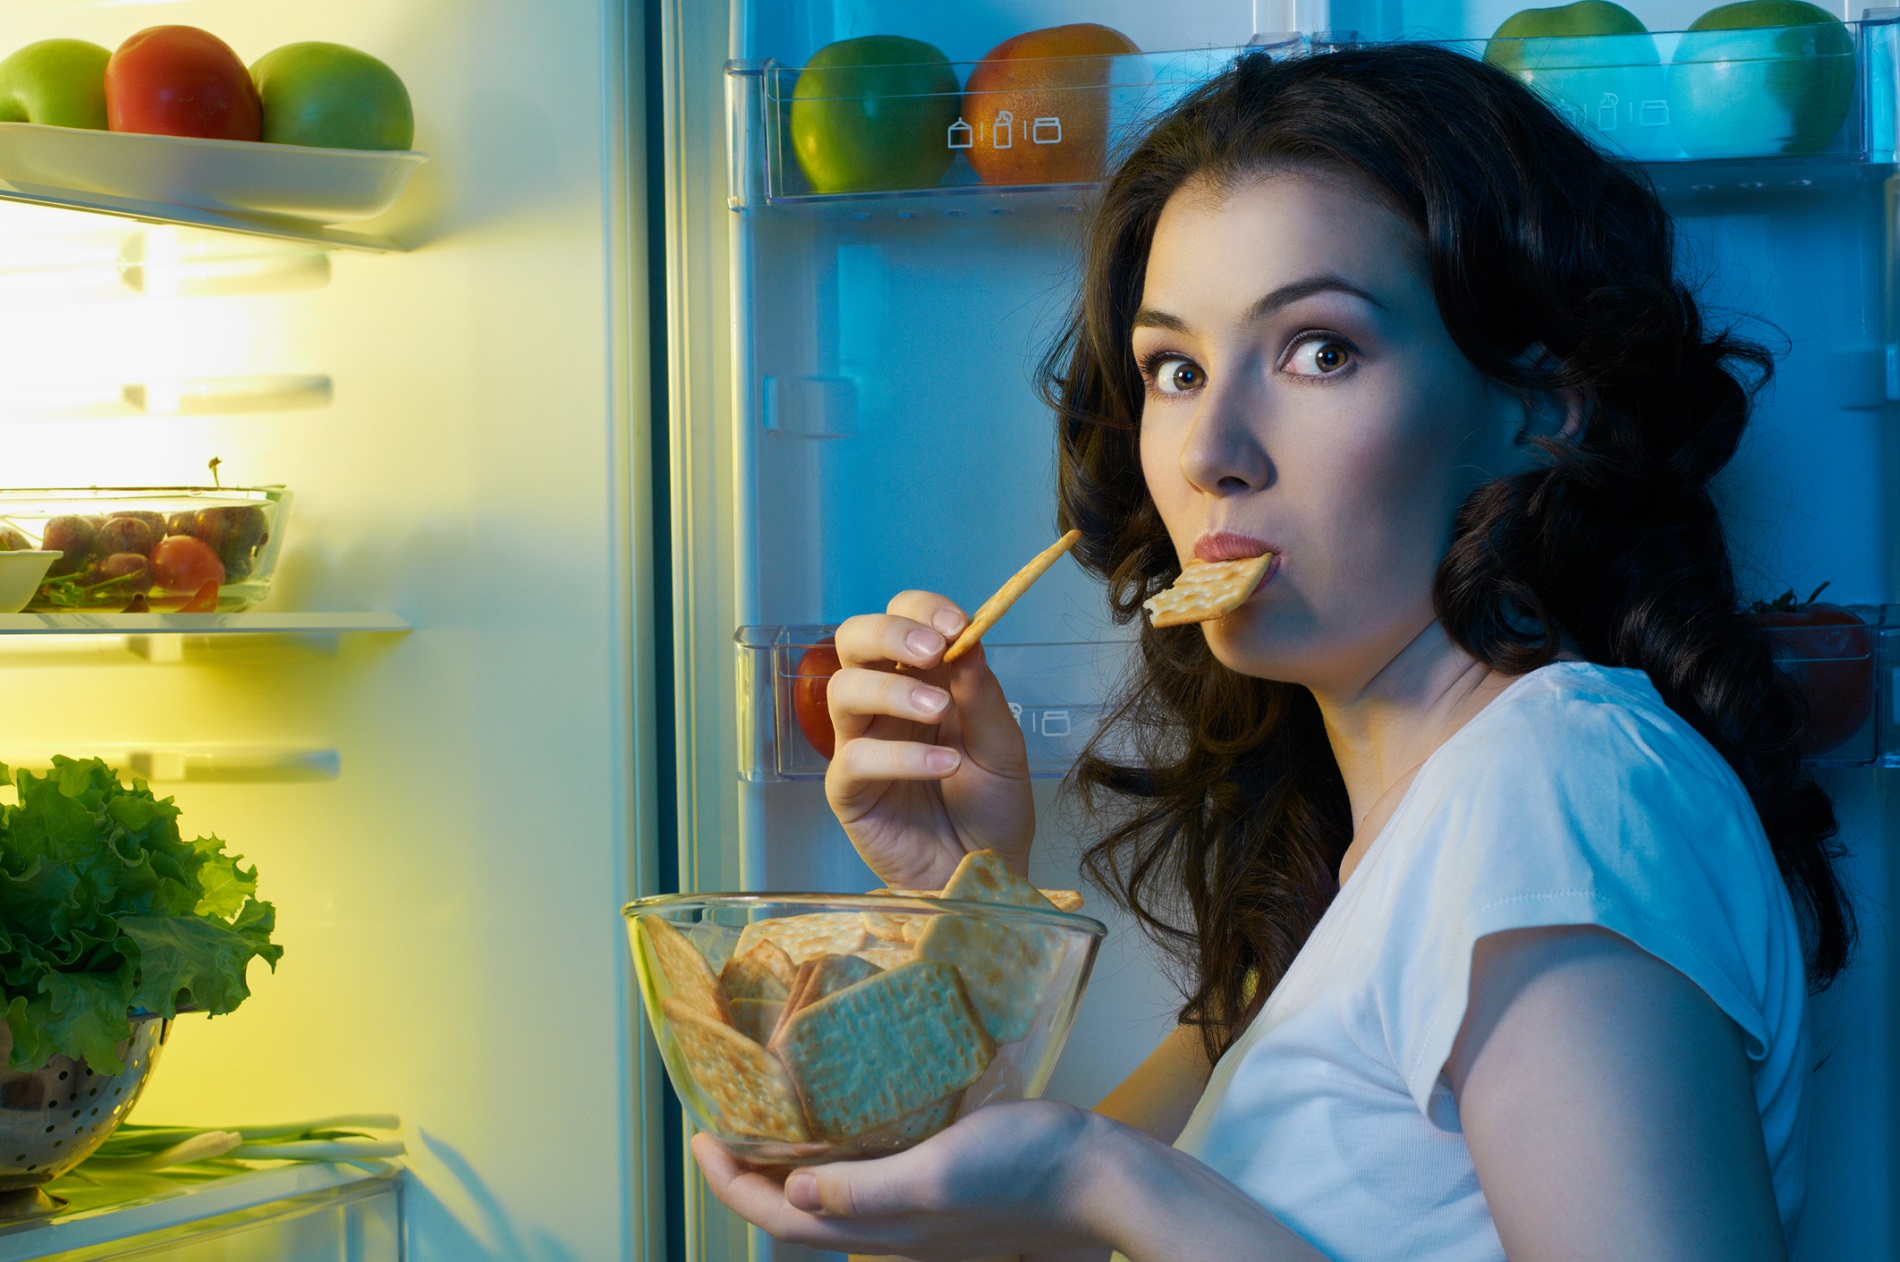 How to avoid late night snacking